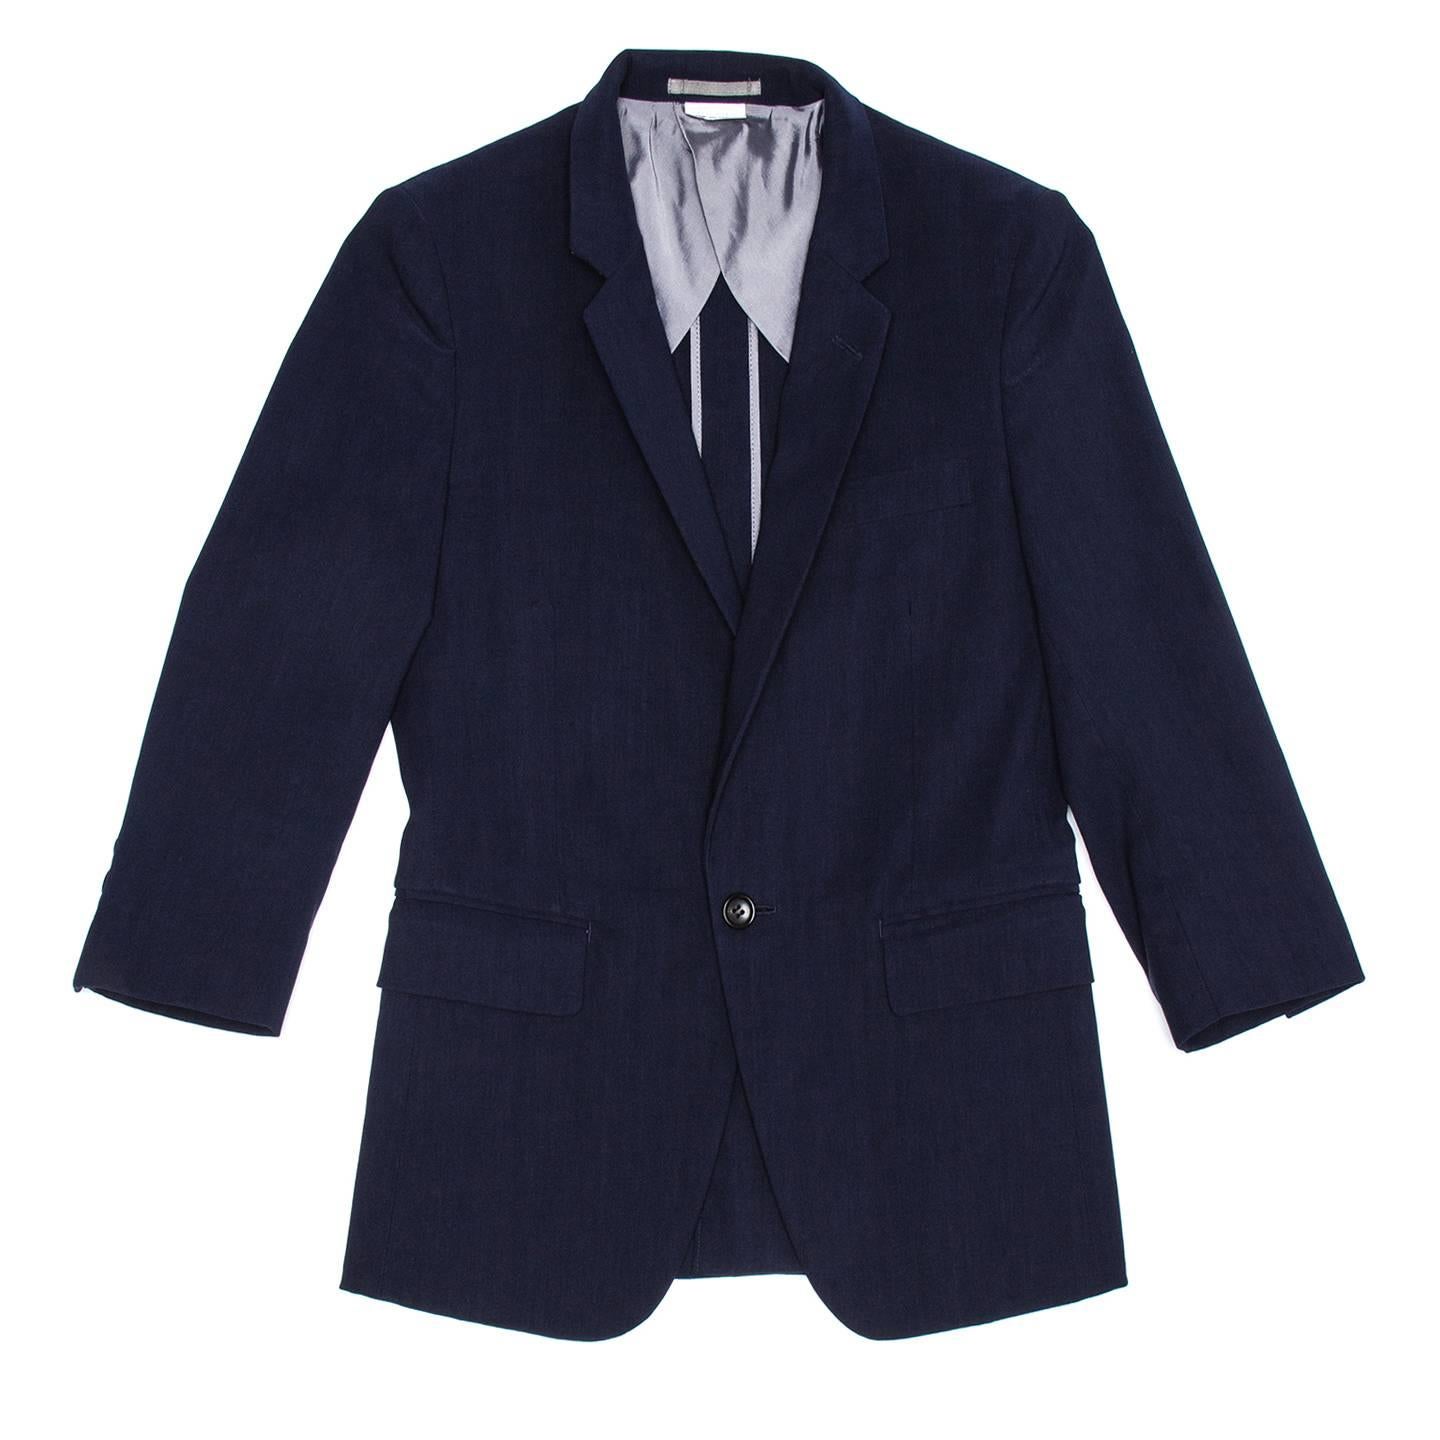 Navy blue linen stretch blend very fitted jacket with 3/4 sleeves, single vent at back and single button at front. The blazer is worn with the neck standing showing the grey under collar and the lapel flat and fastened at neck with a button. Comme